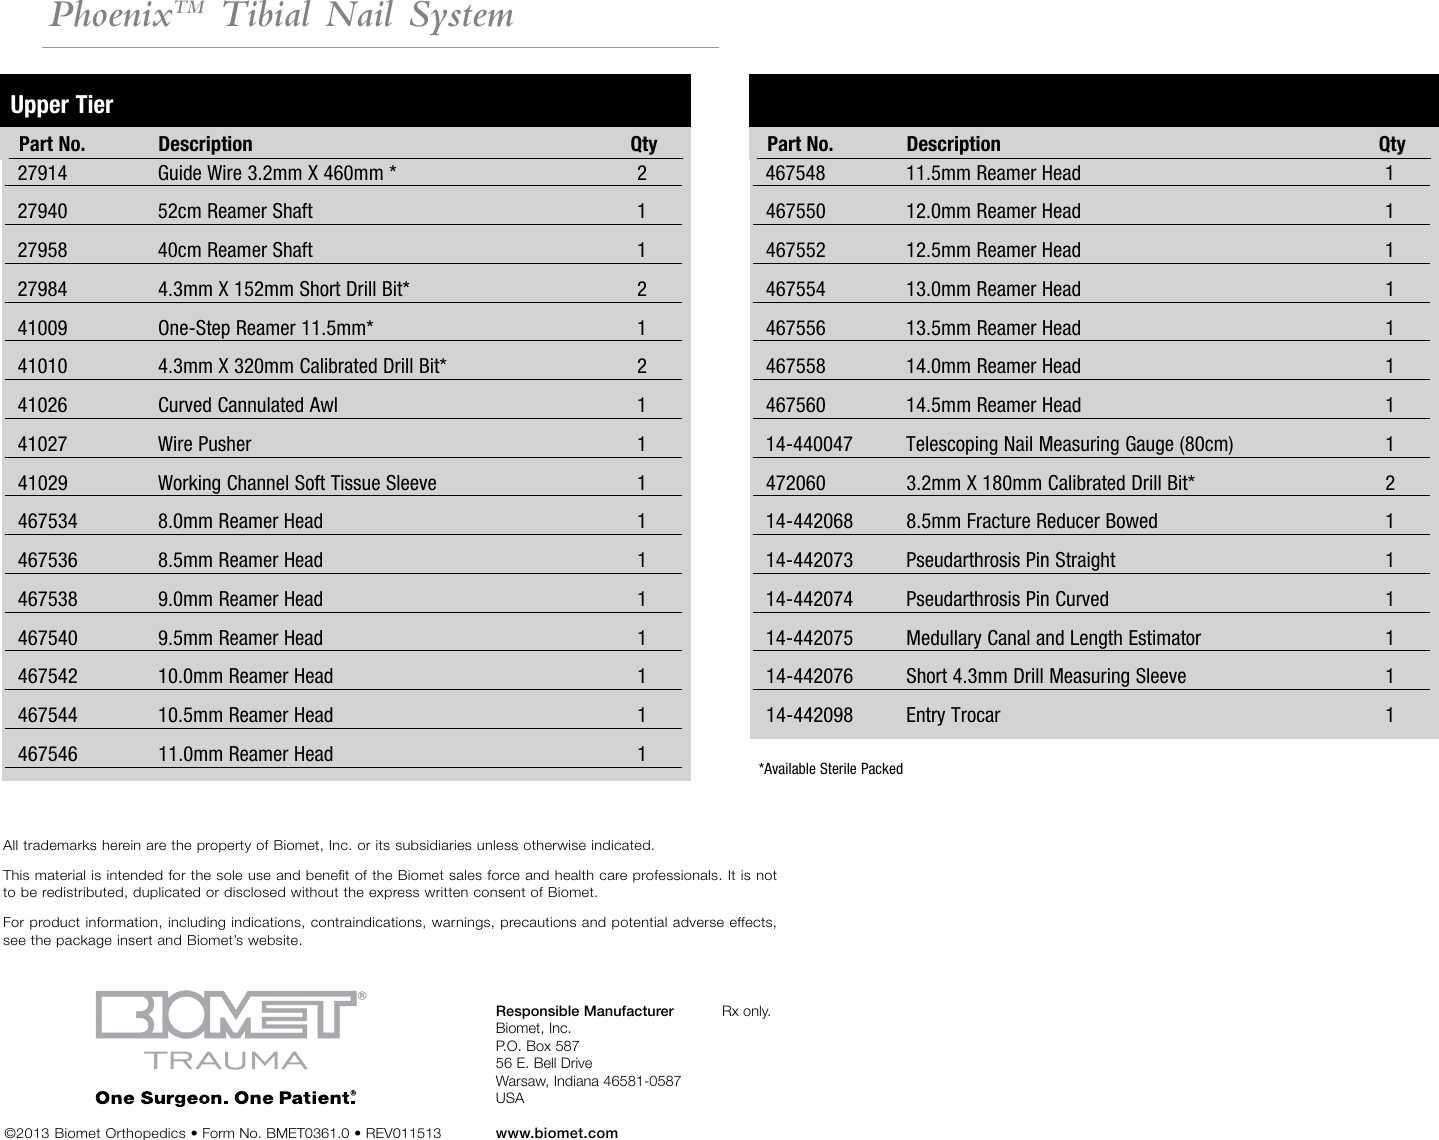 Page 2 of 6 - BMET0361.0 Phoenix Tibial Nail System Tray Cards